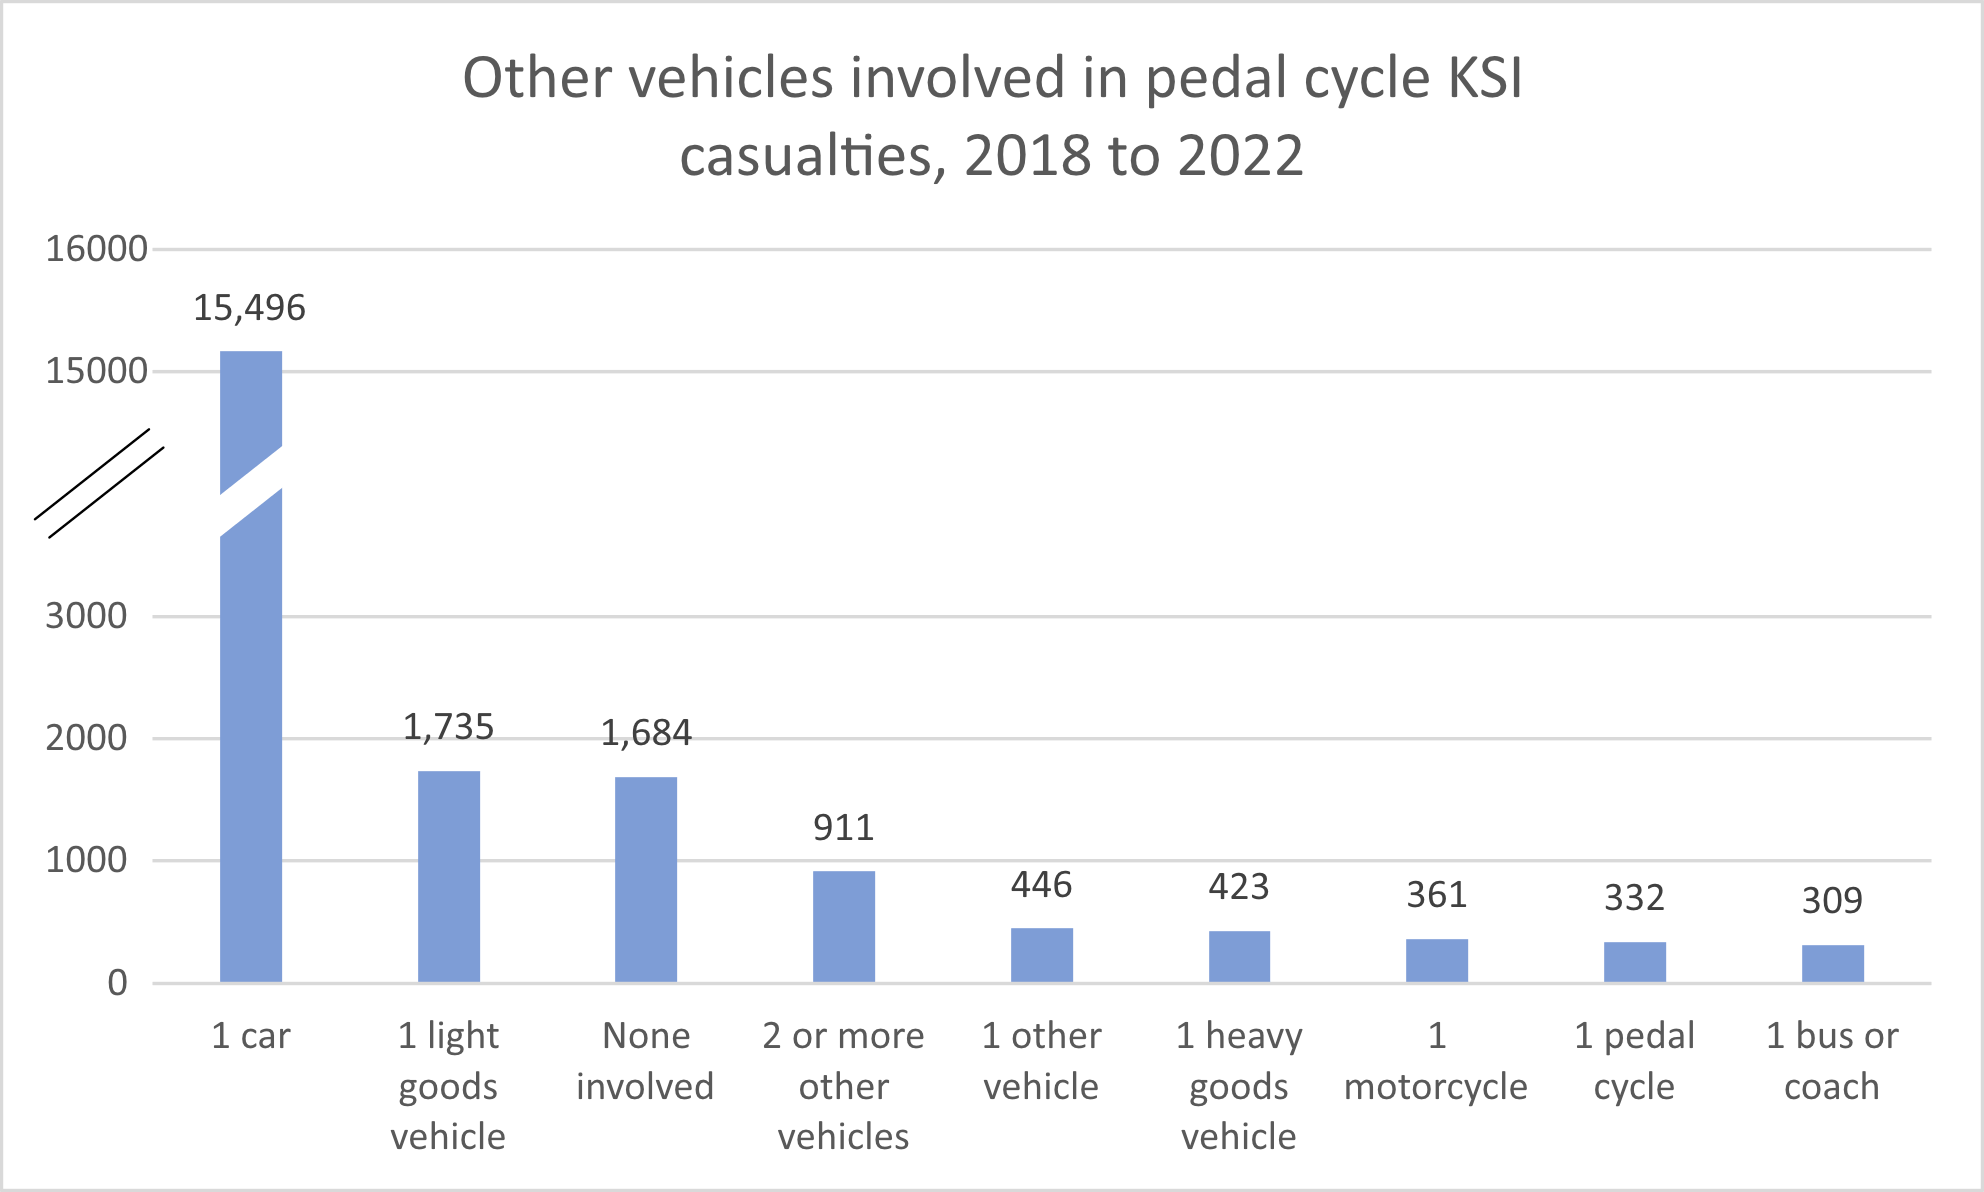 Other vehicles in pedal cycle KSI